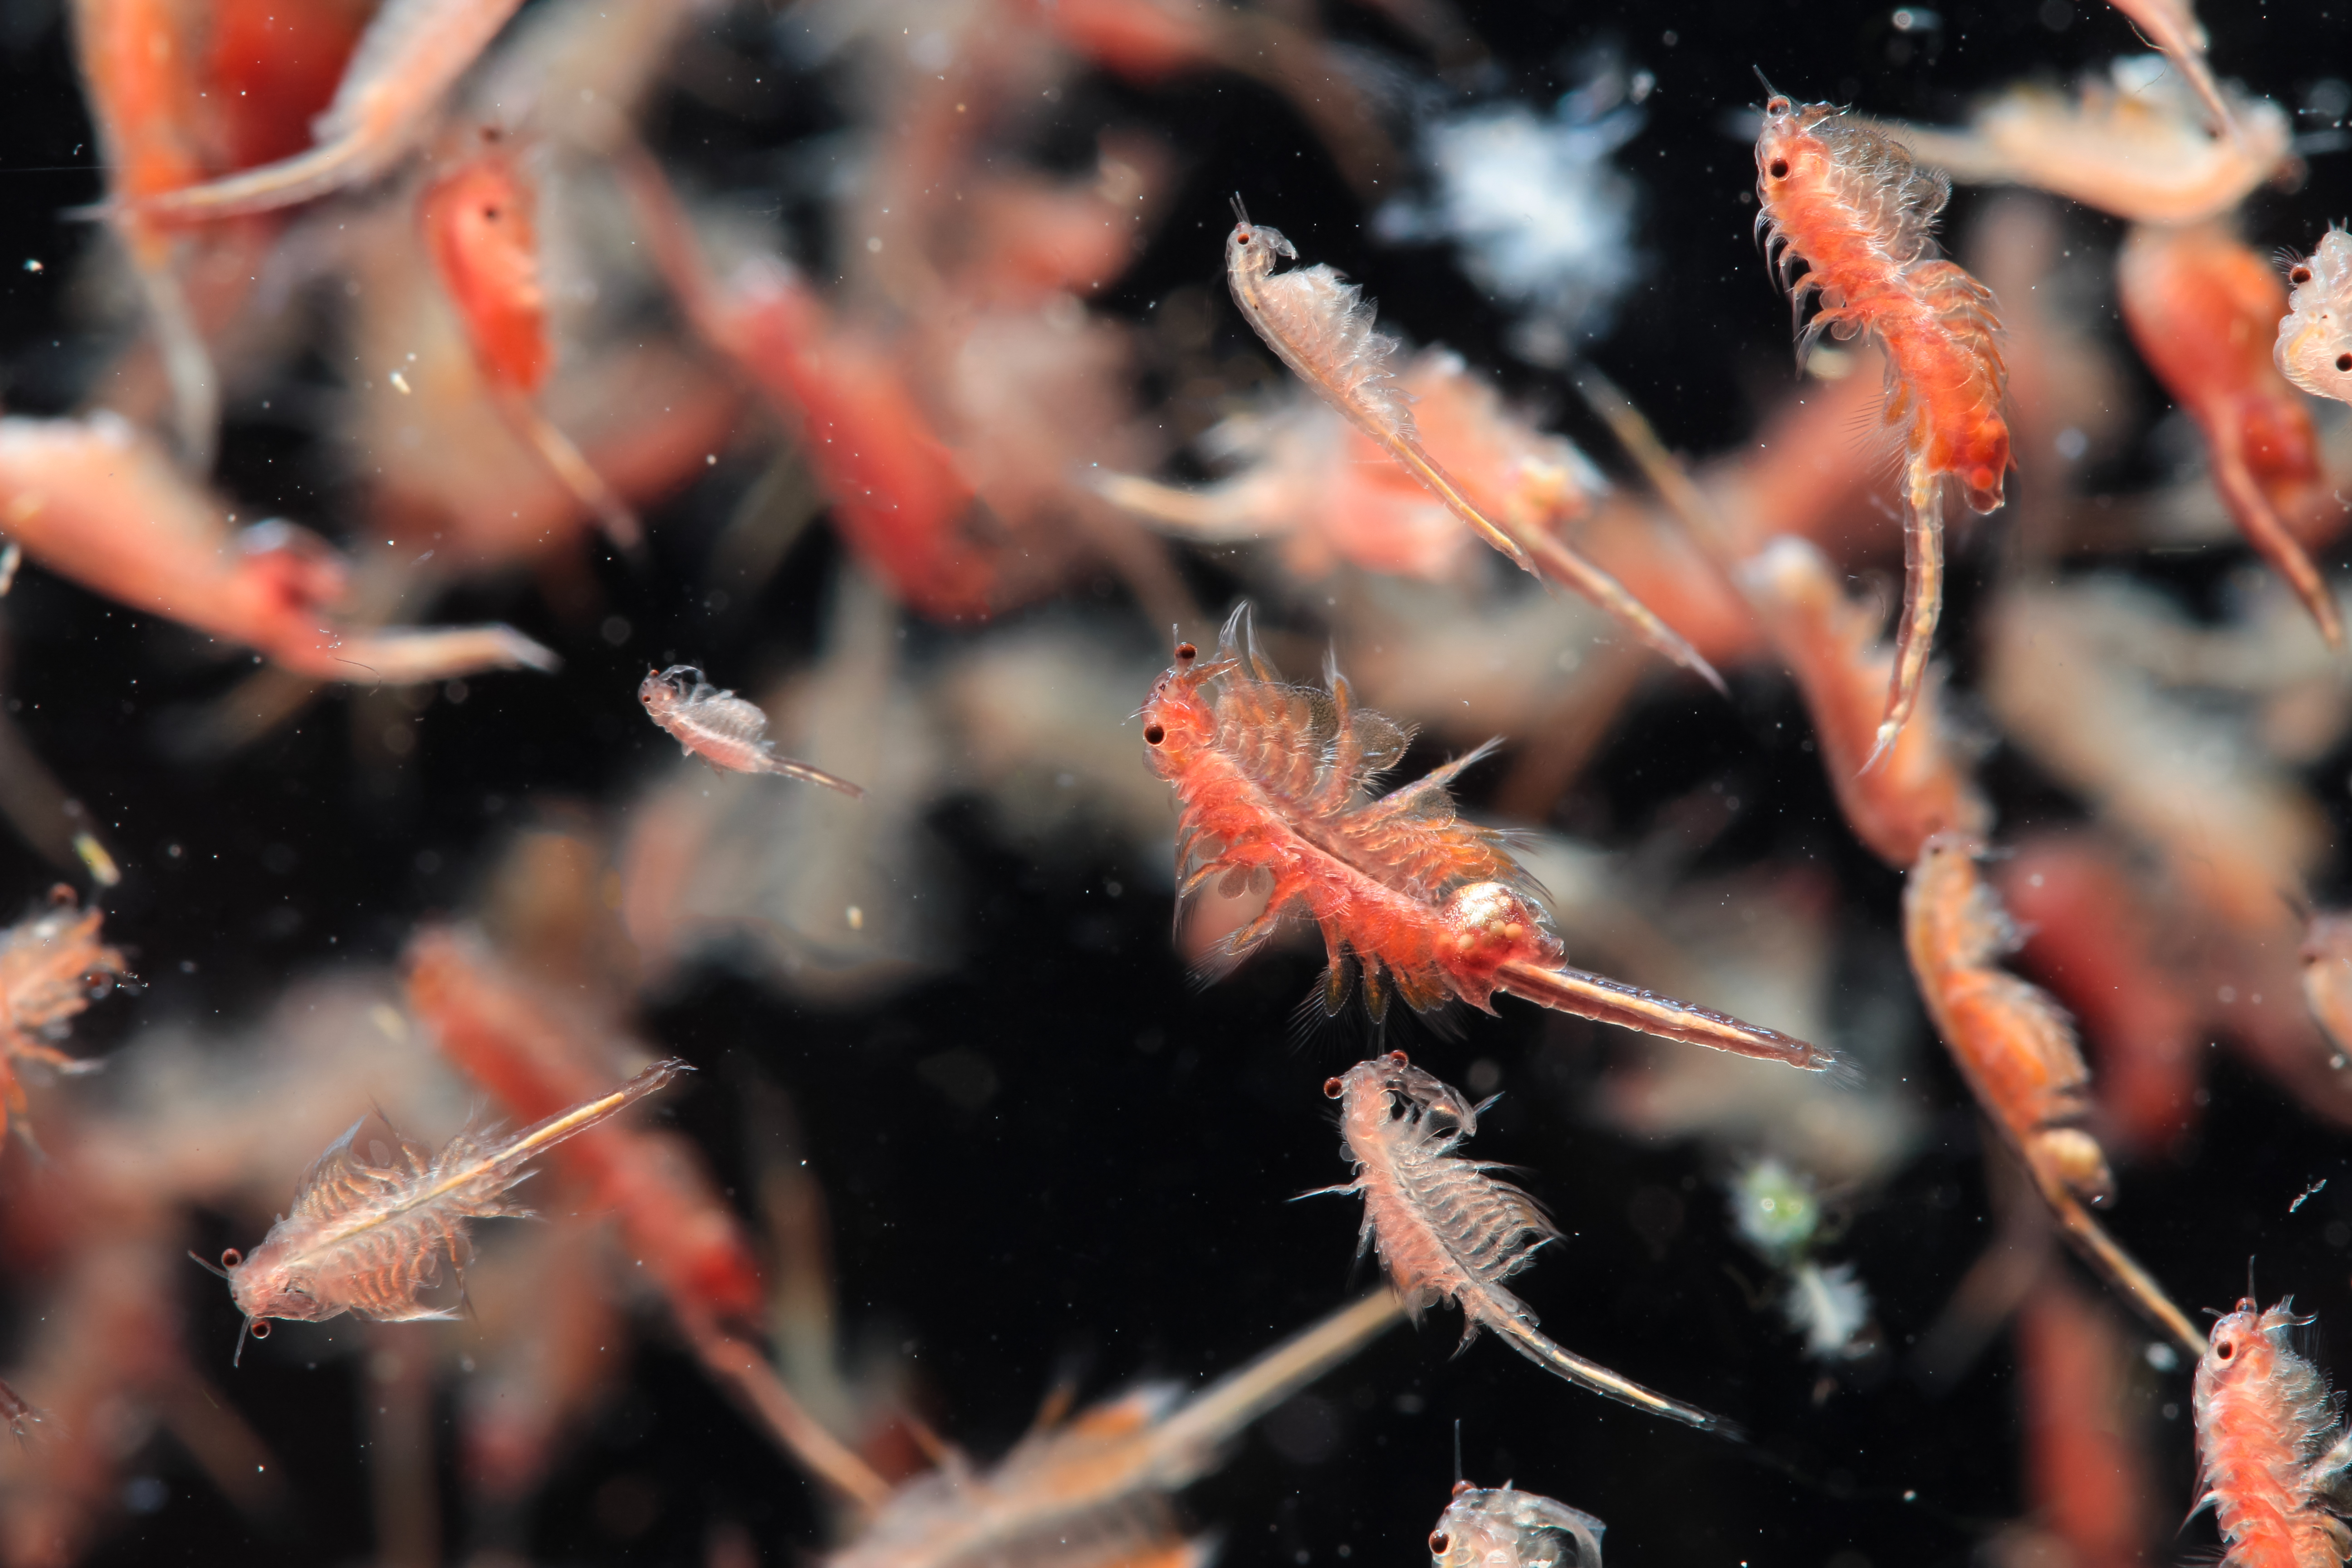 Shrimp may be the key to stabilizing the ocean